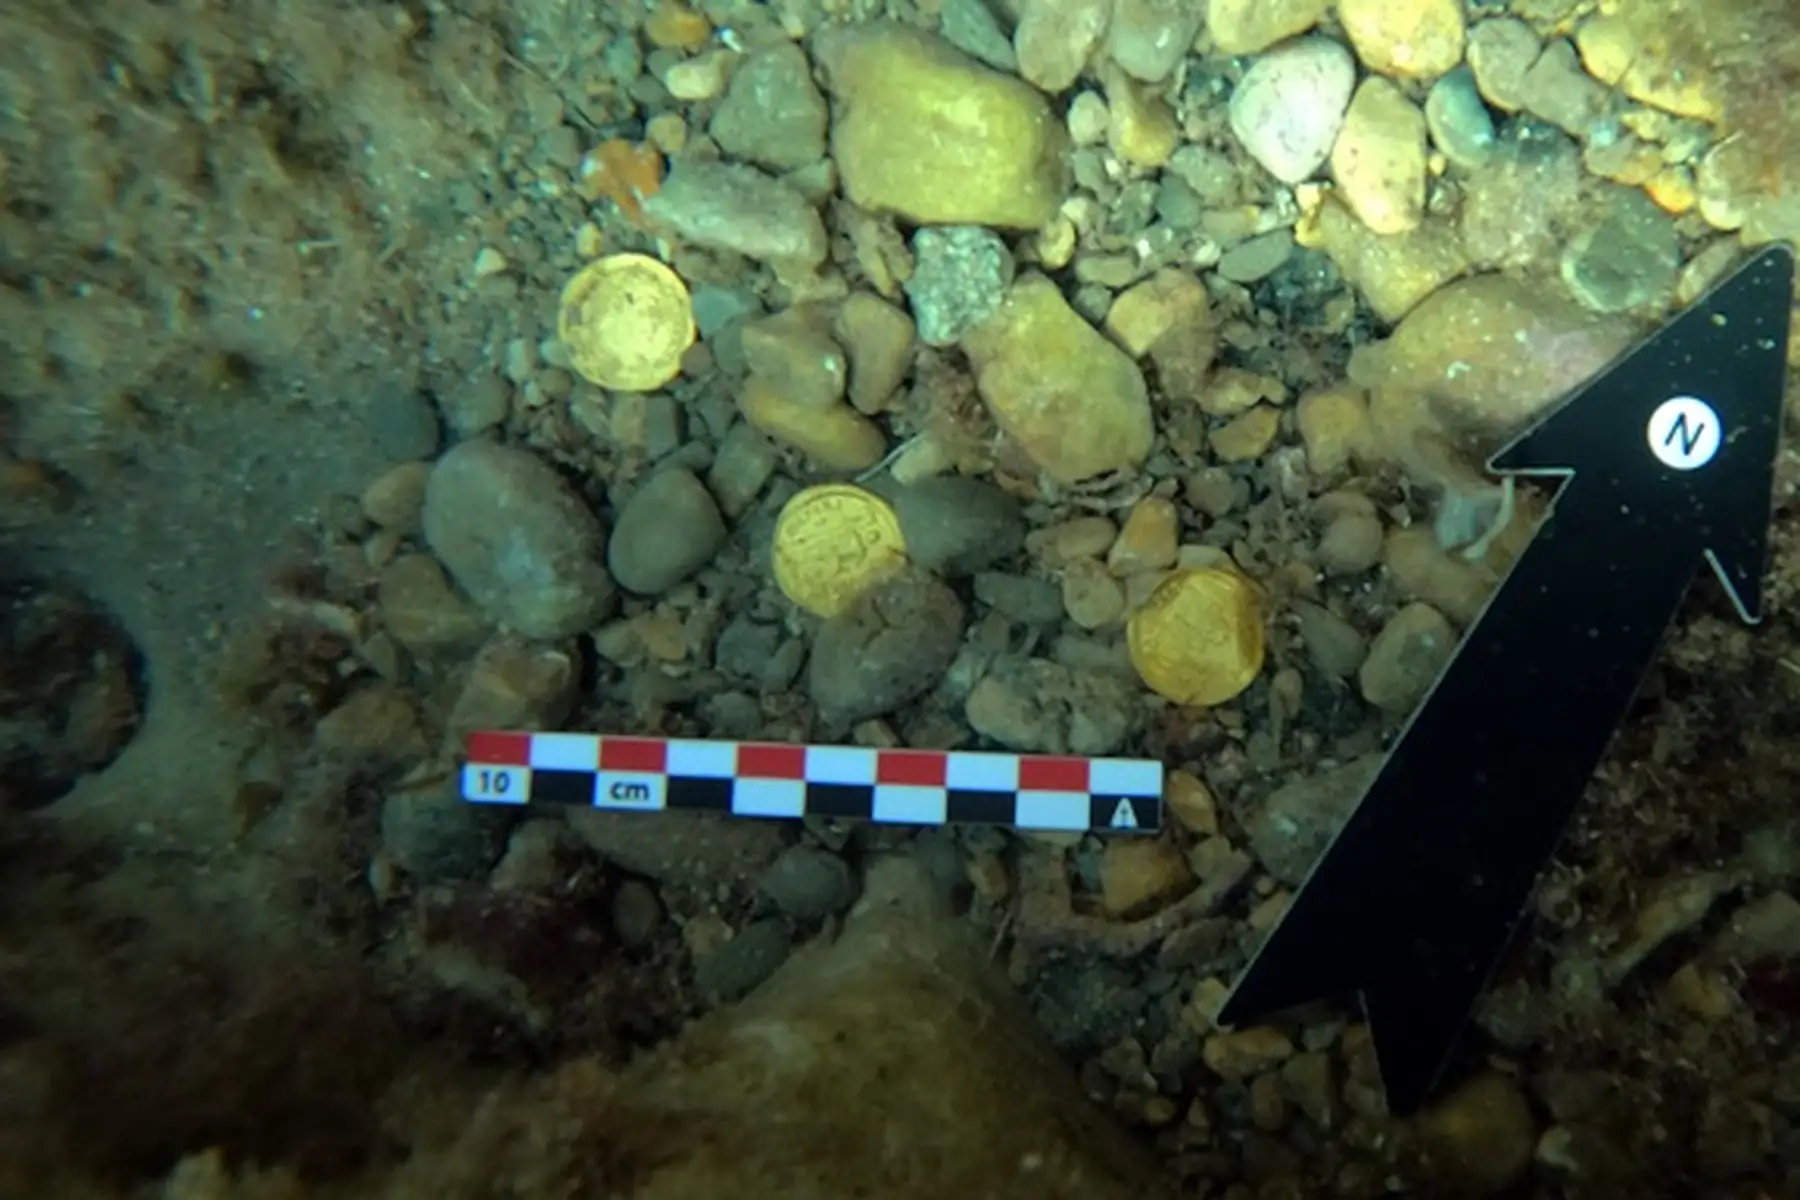 Divers discover a unique treasure trove of gold coins from the fall of the Roman Empire